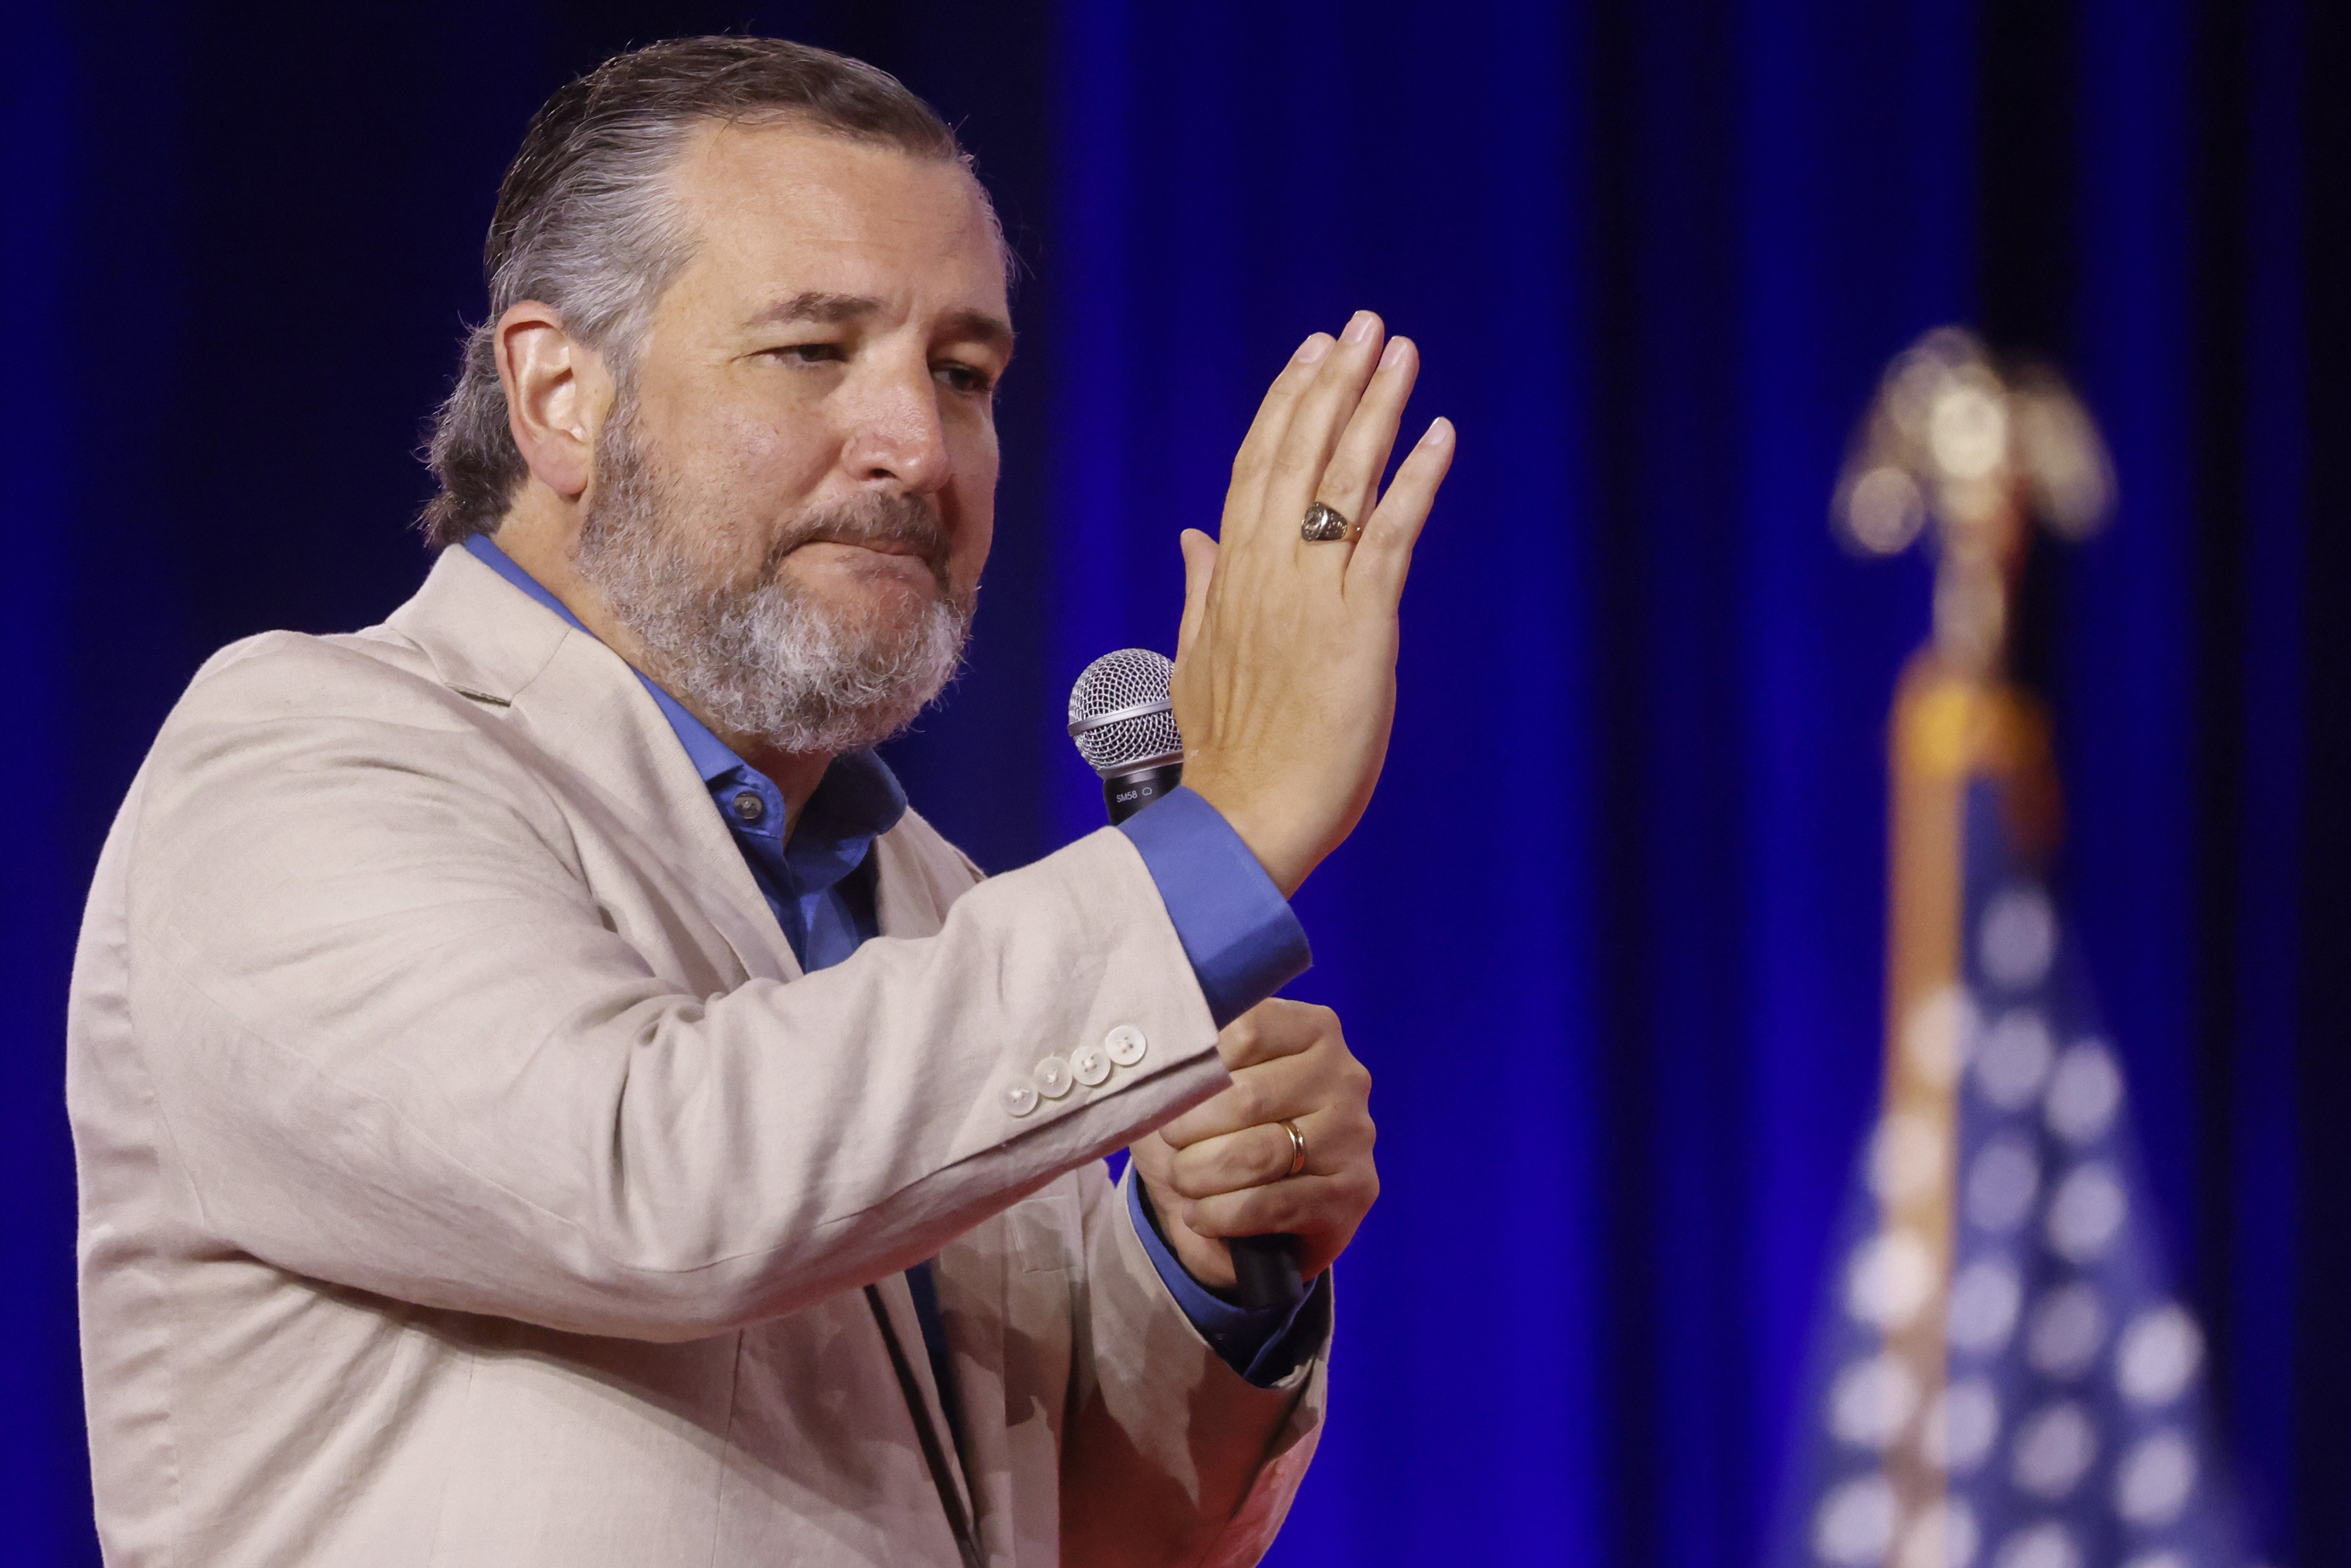 Ted Cruz softens on same-sex marriage, says reasonable people can disagree